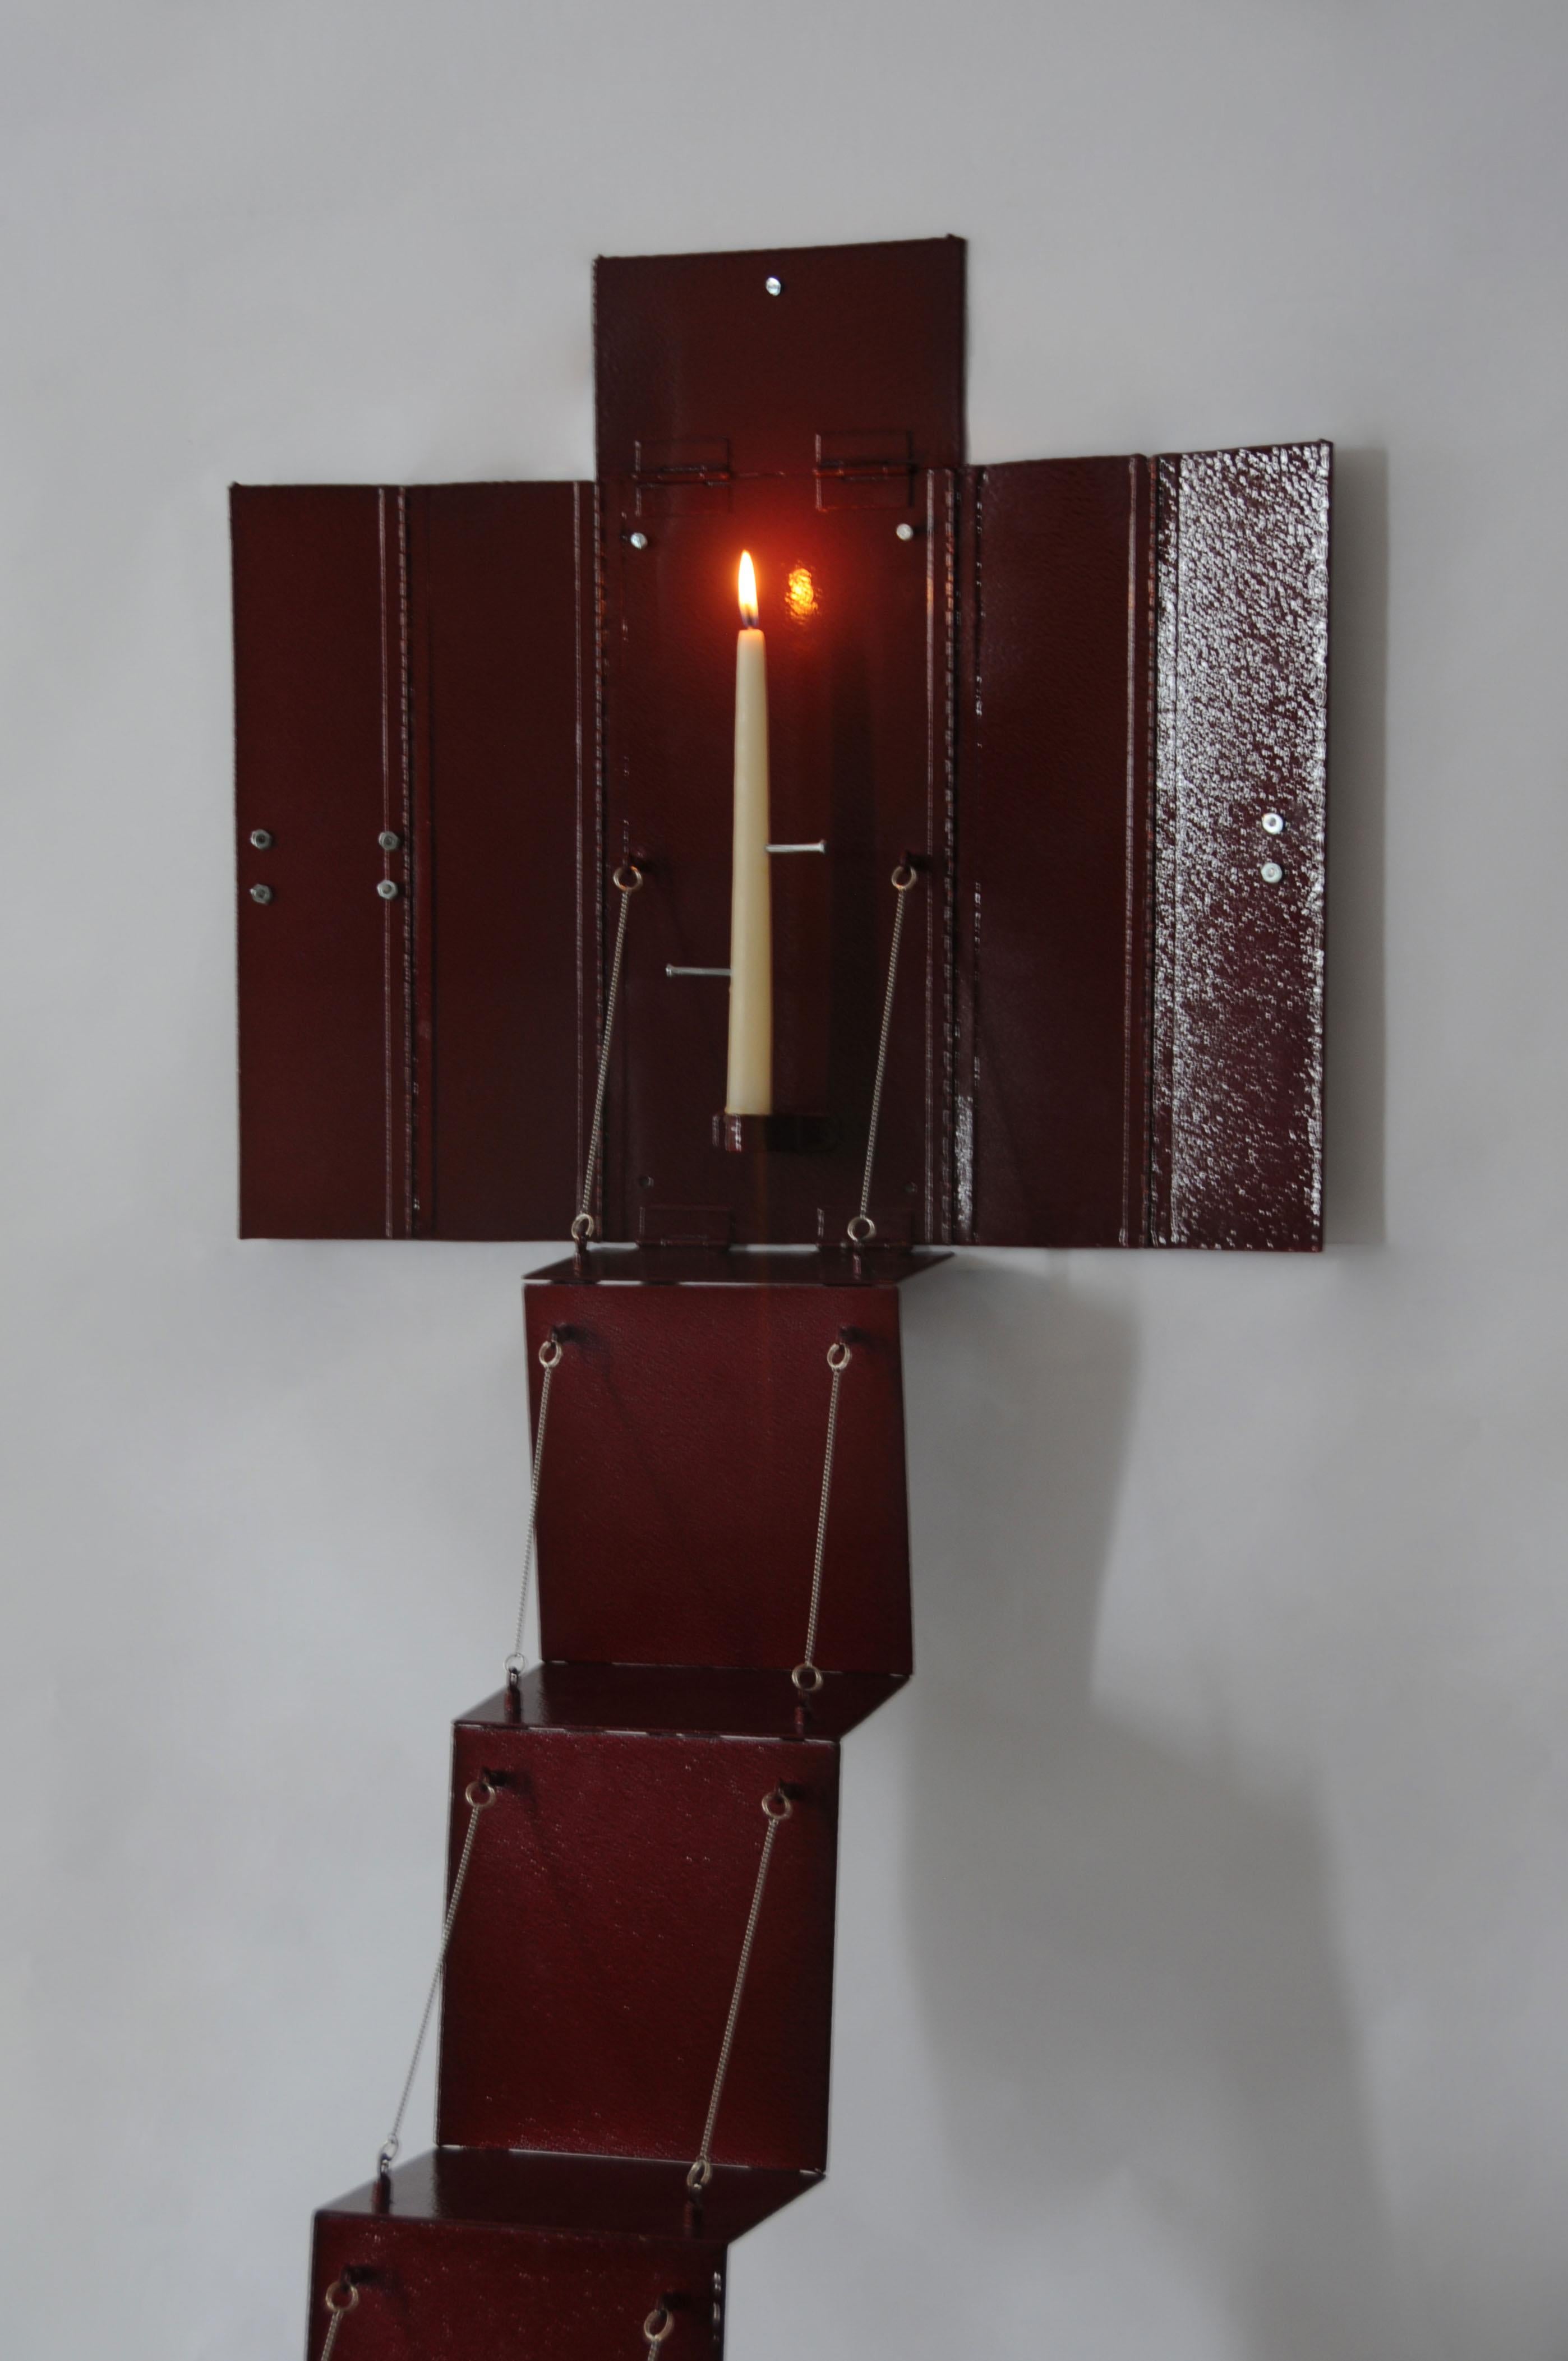 A candle holder rendered in blood red steel is mounted onto the wall as an altar panel painting that folds closed to simulate a medical cabinet. The candle supported by the metal structure is pierced by nails at different heights marking time